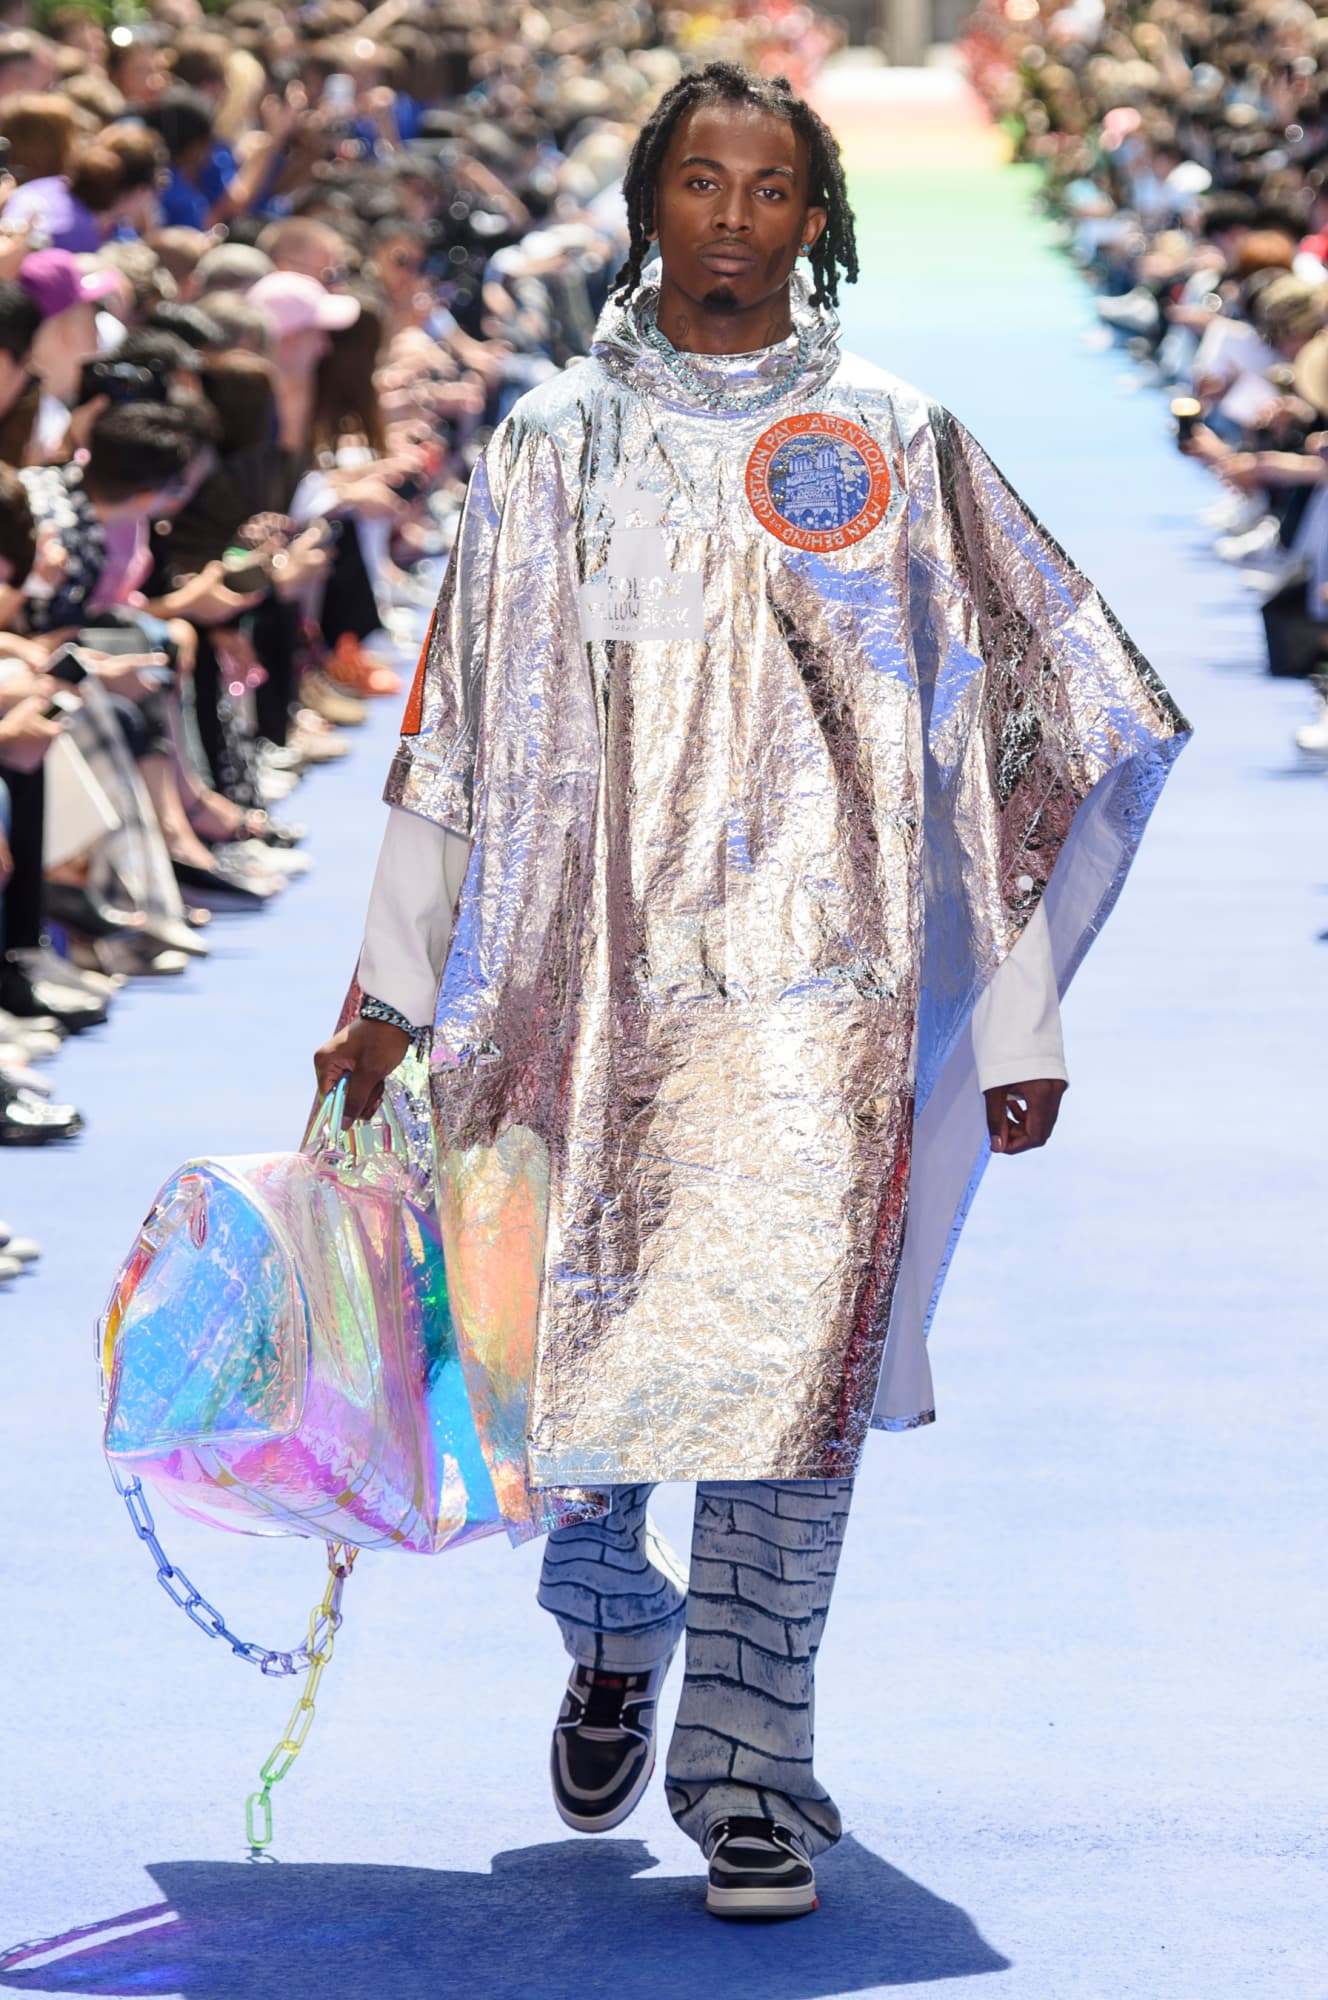 Louis Vuitton's First Collection from Virgil Abloh – Alarna Studio